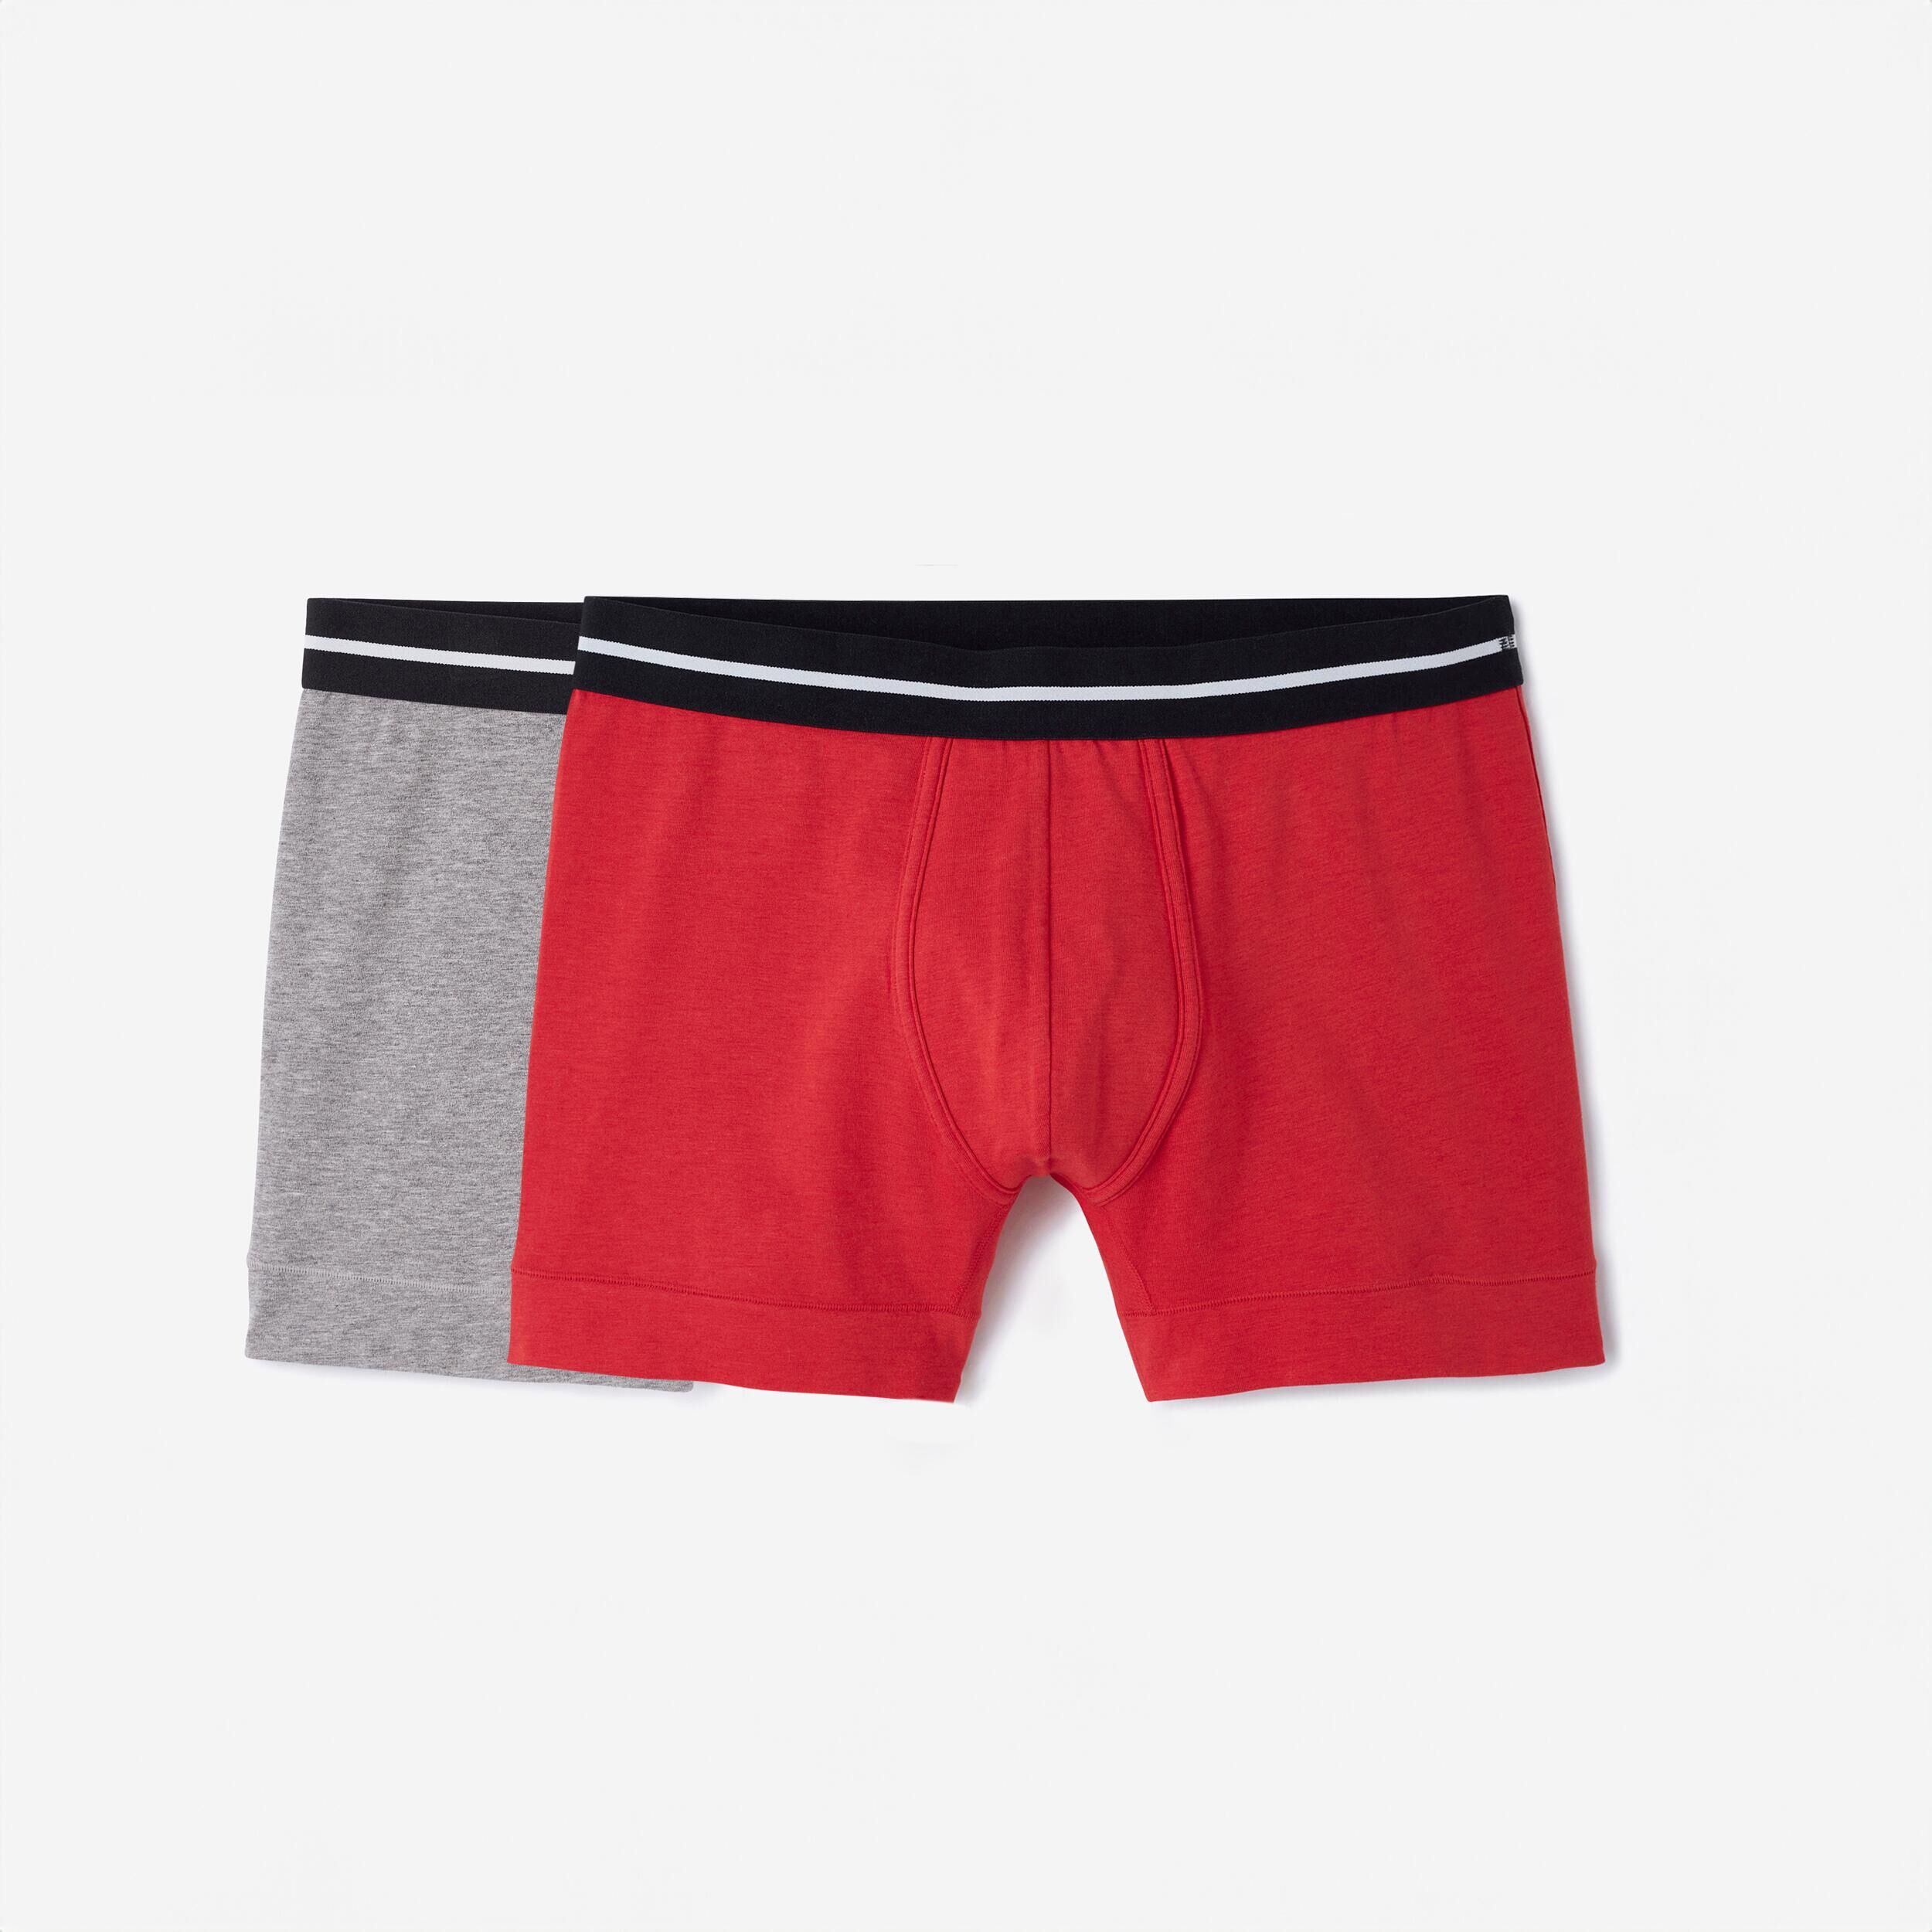 DOMYOS Men's Cotton Boxers Twin-Pack - Grey/Red